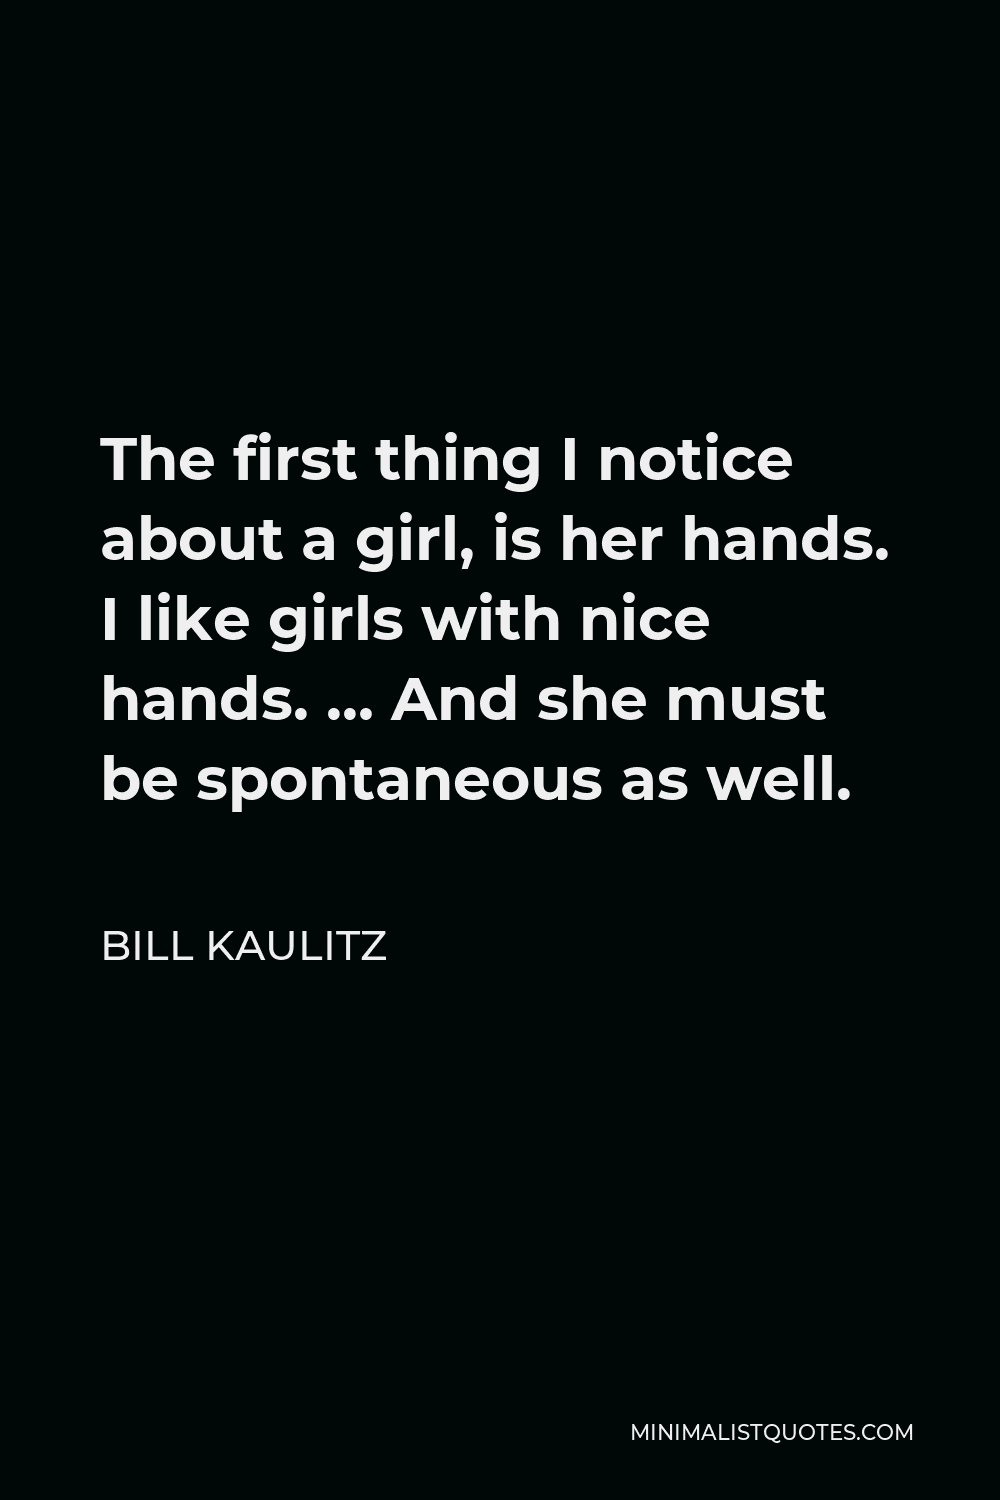 Bill Kaulitz Quote - The first thing I notice about a girl, is her hands. I like girls with nice hands. … And she must be spontaneous as well.